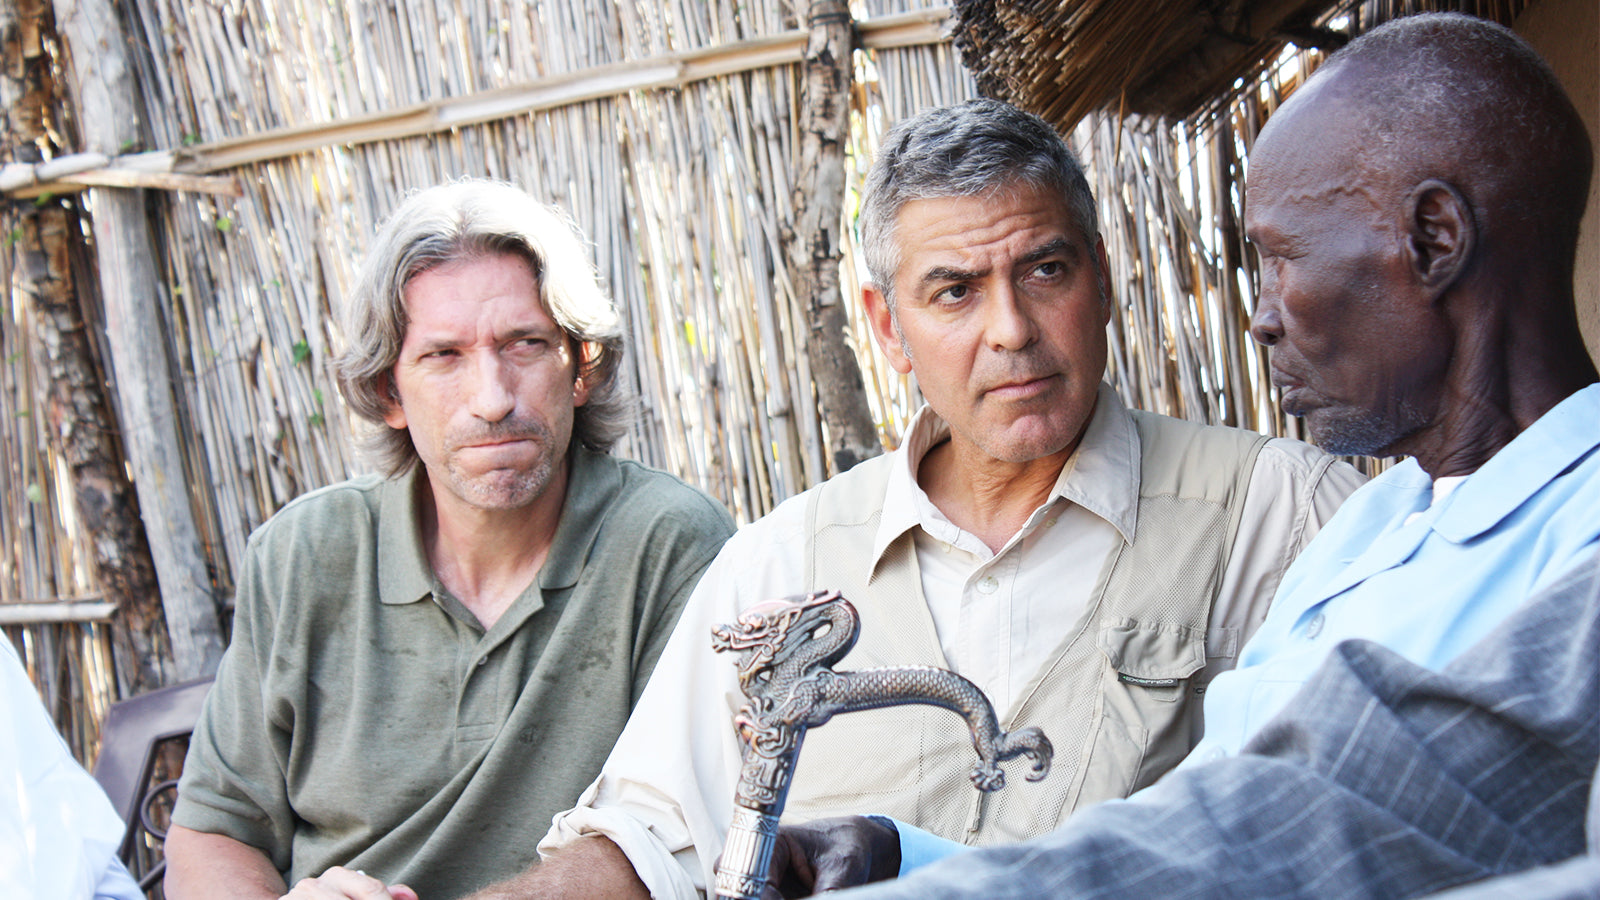 George Clooney sits and speaks with two men.